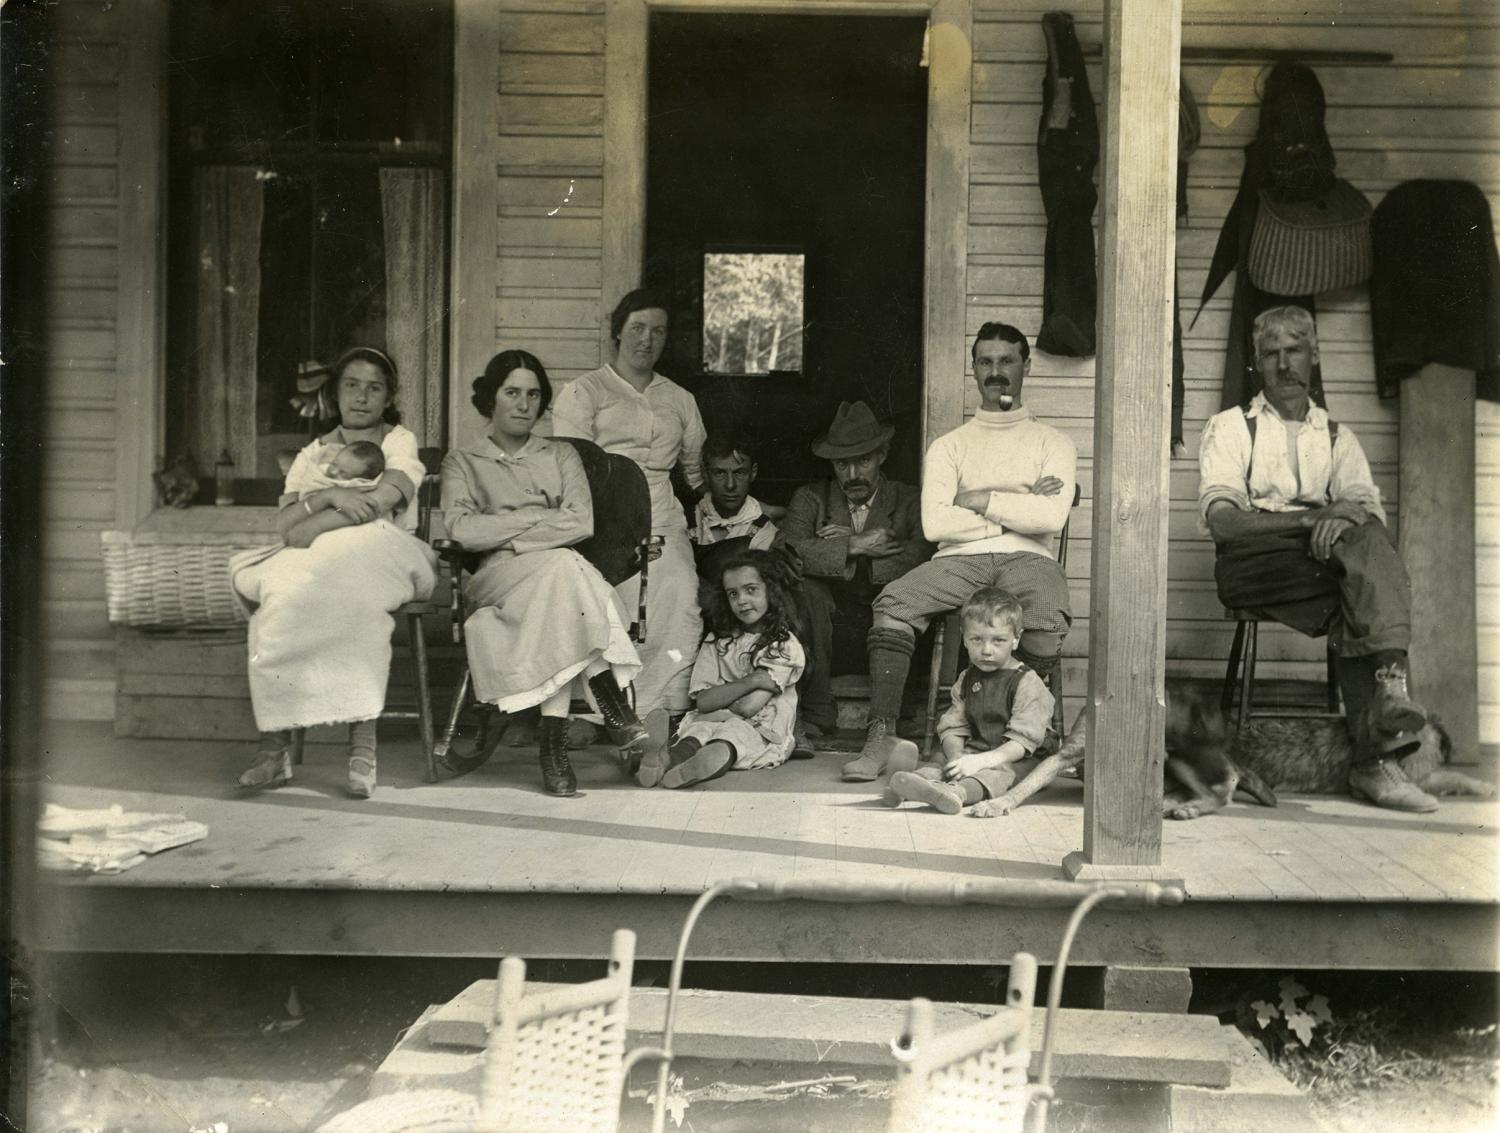 Members of the Sylvester family sitting on their porch